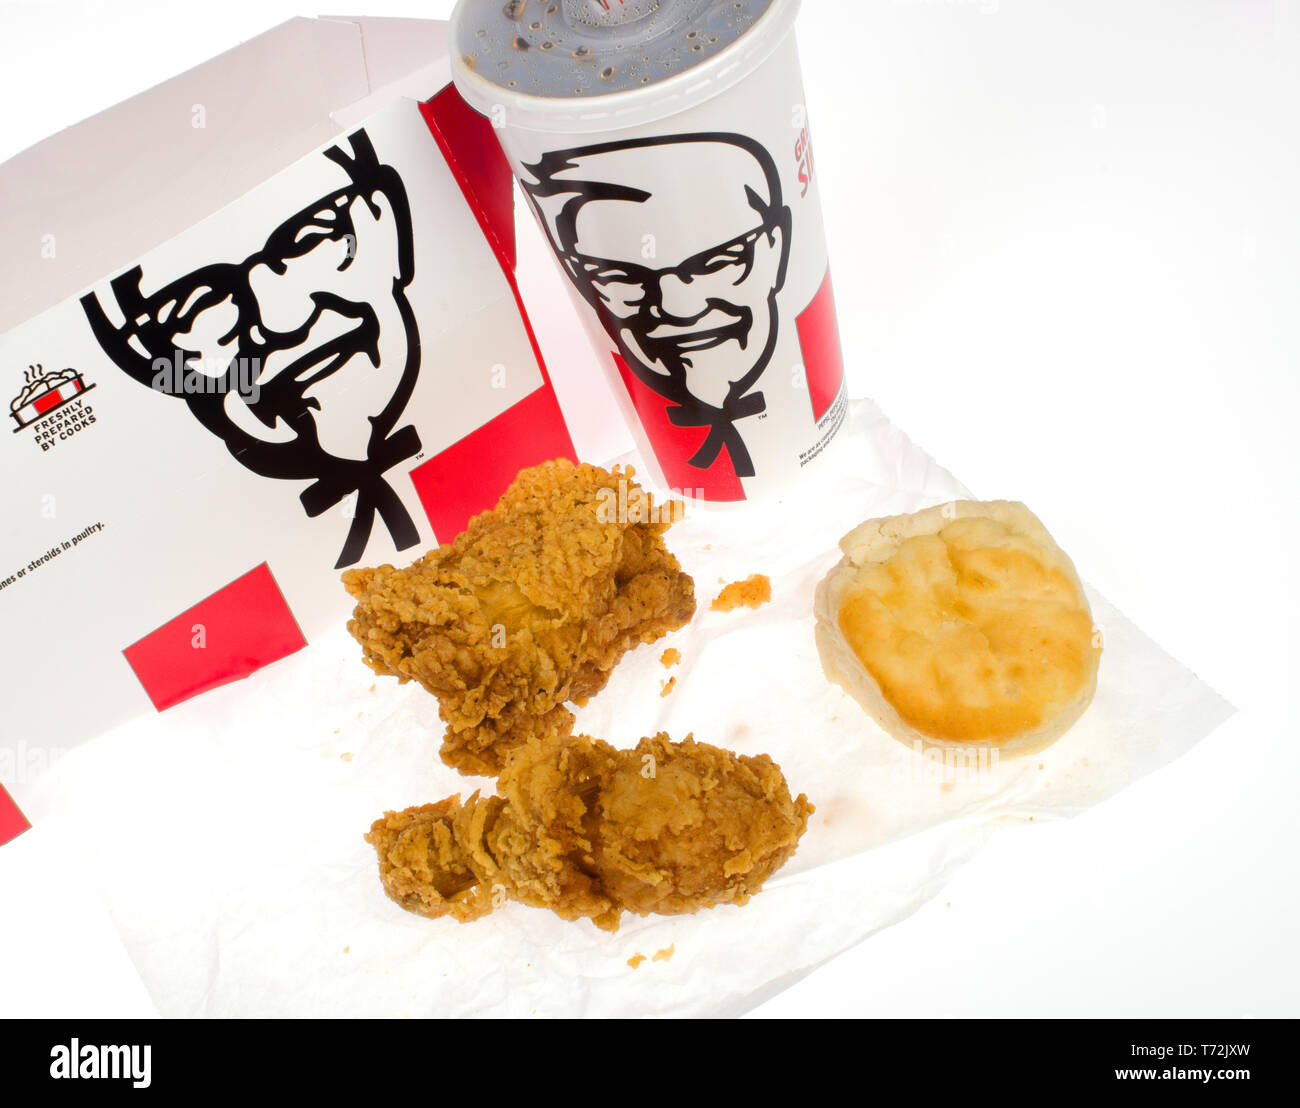 Kentucky Fried Chicken, KFC, box meal $5 Fill Up with a crispy fried chicken thigh and drumstick and biscuit with soda cup Stock Photo